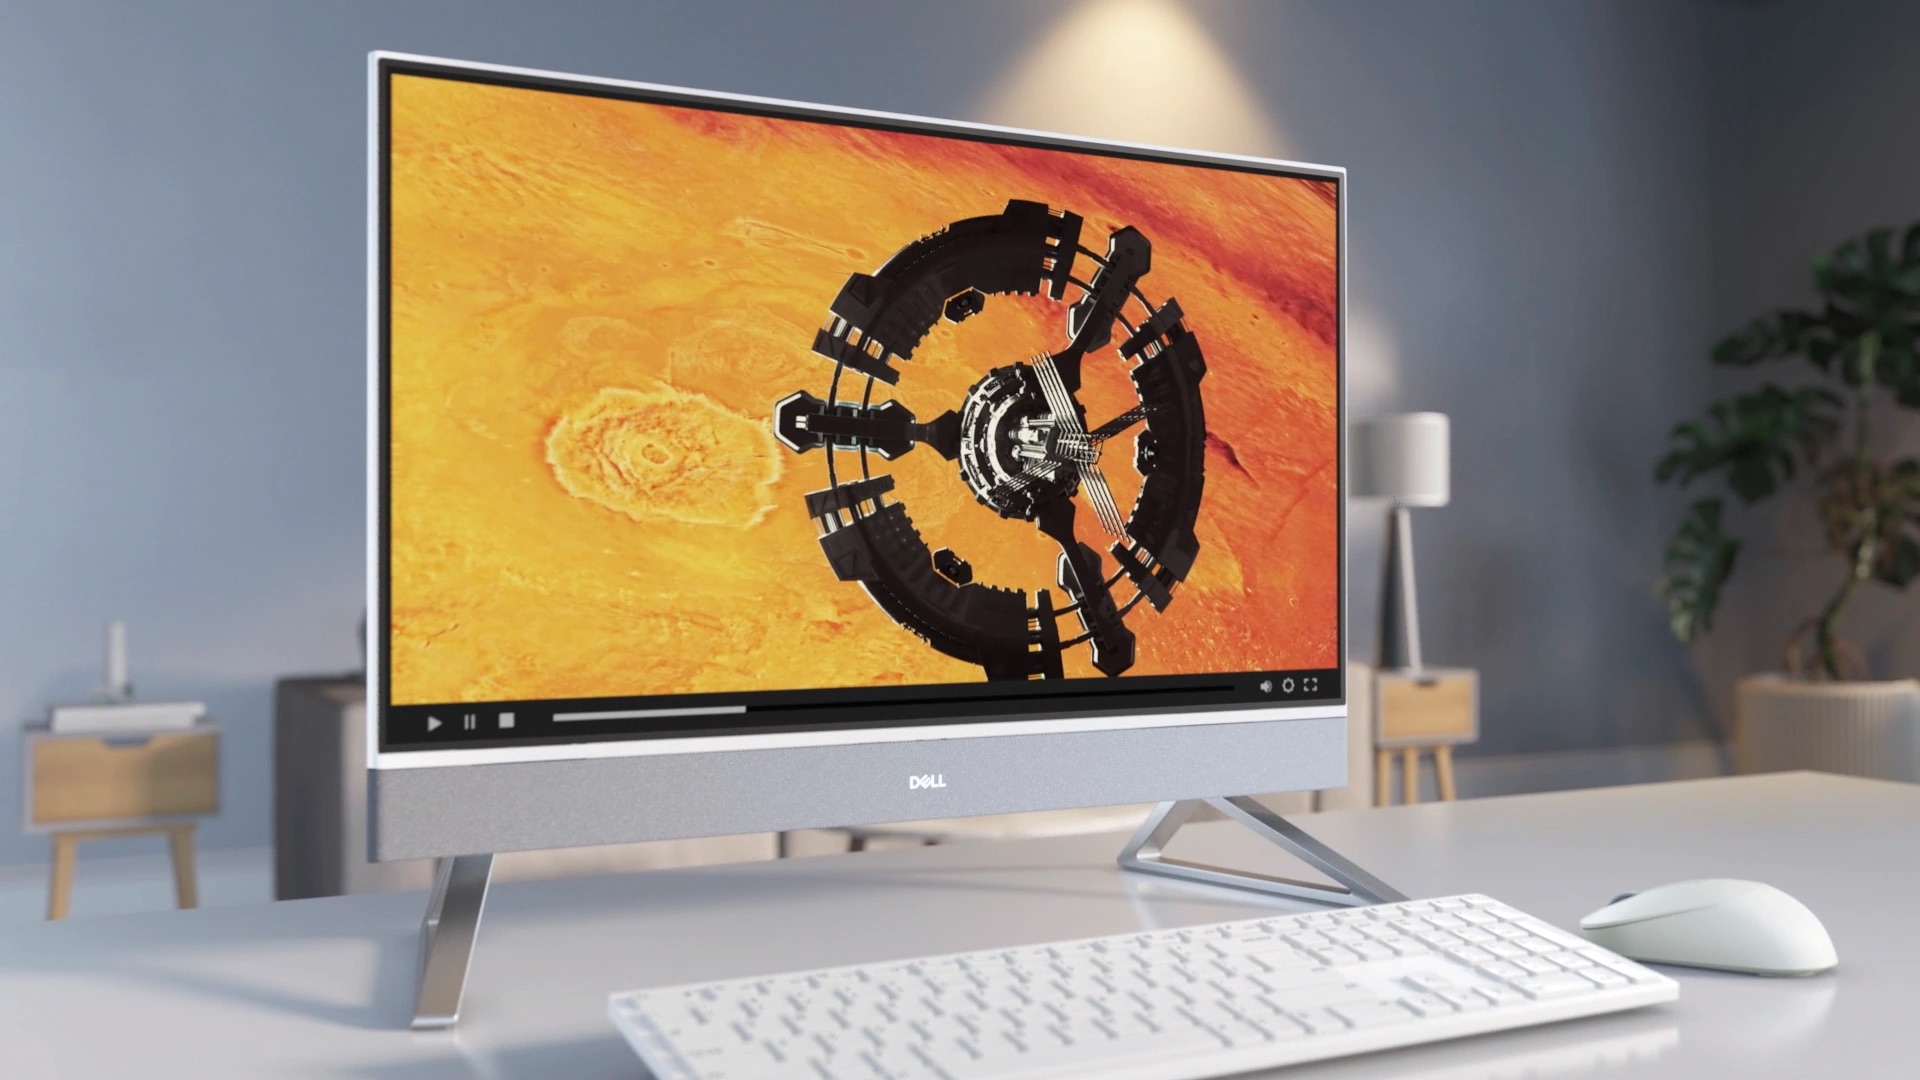 Dell just slashed the price of this all-in-one PC to $650 | Digital Trends